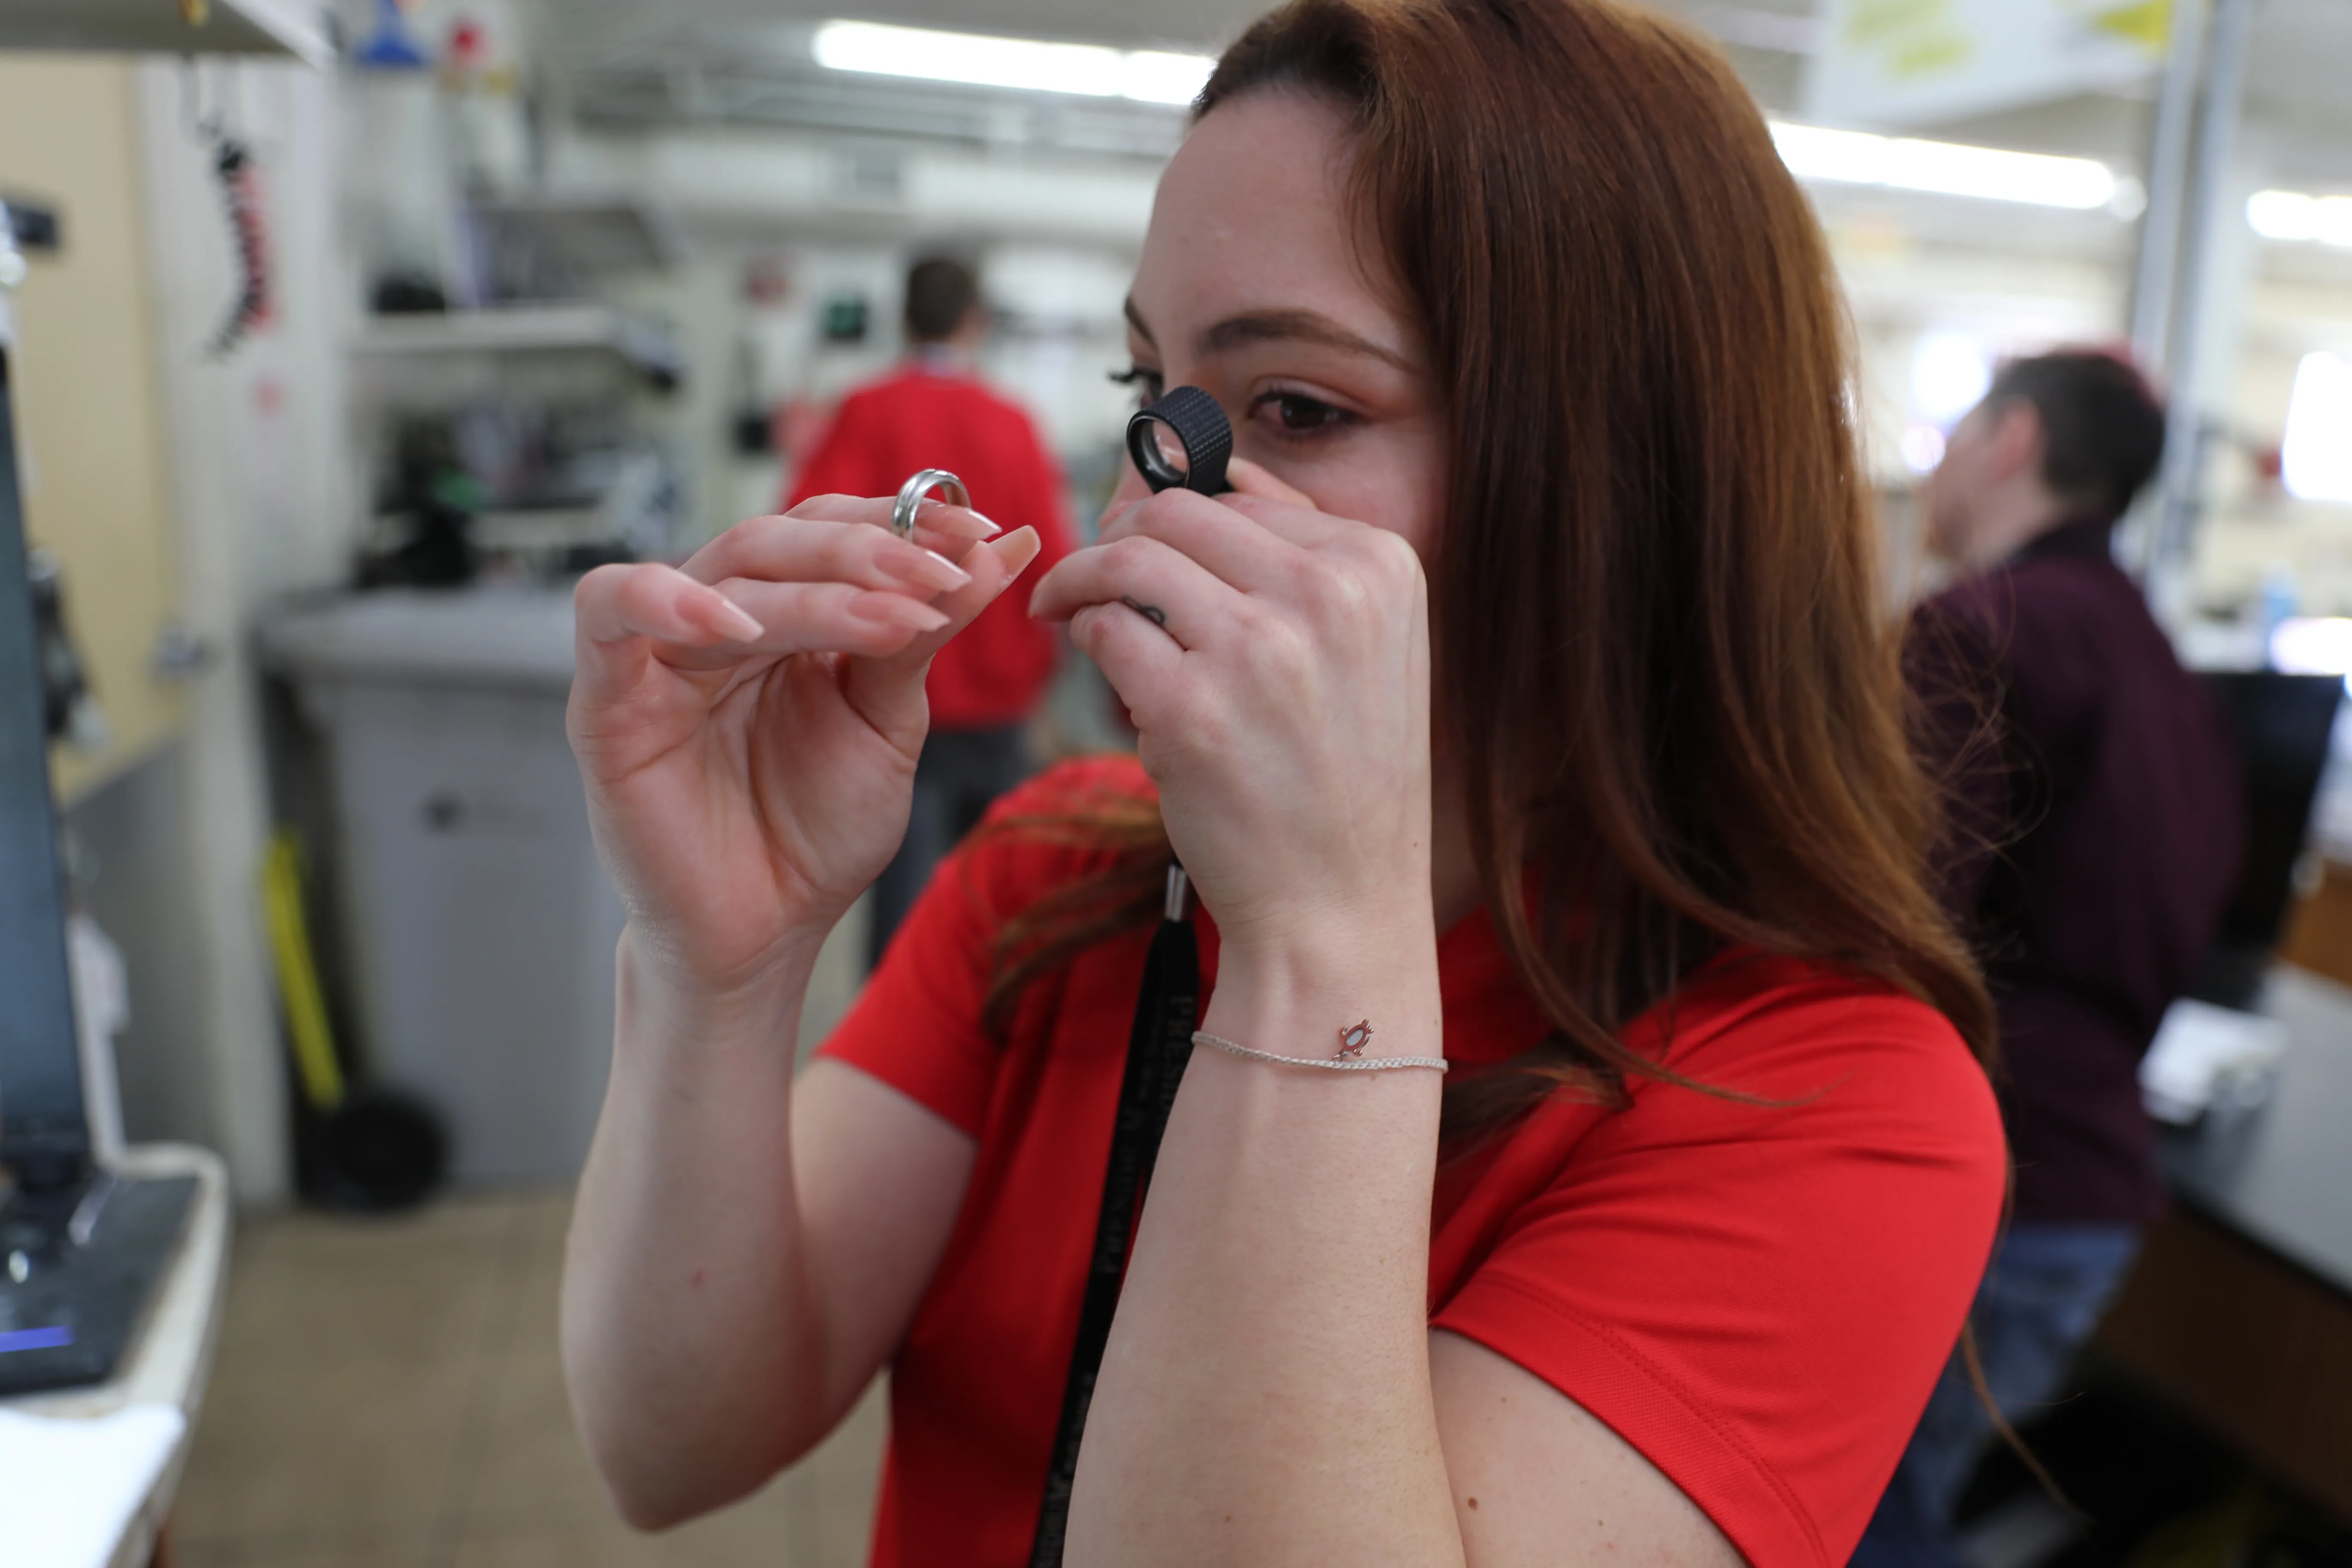 A team member is inspecting a diamond ring through a glass eye piece in the back of the store.